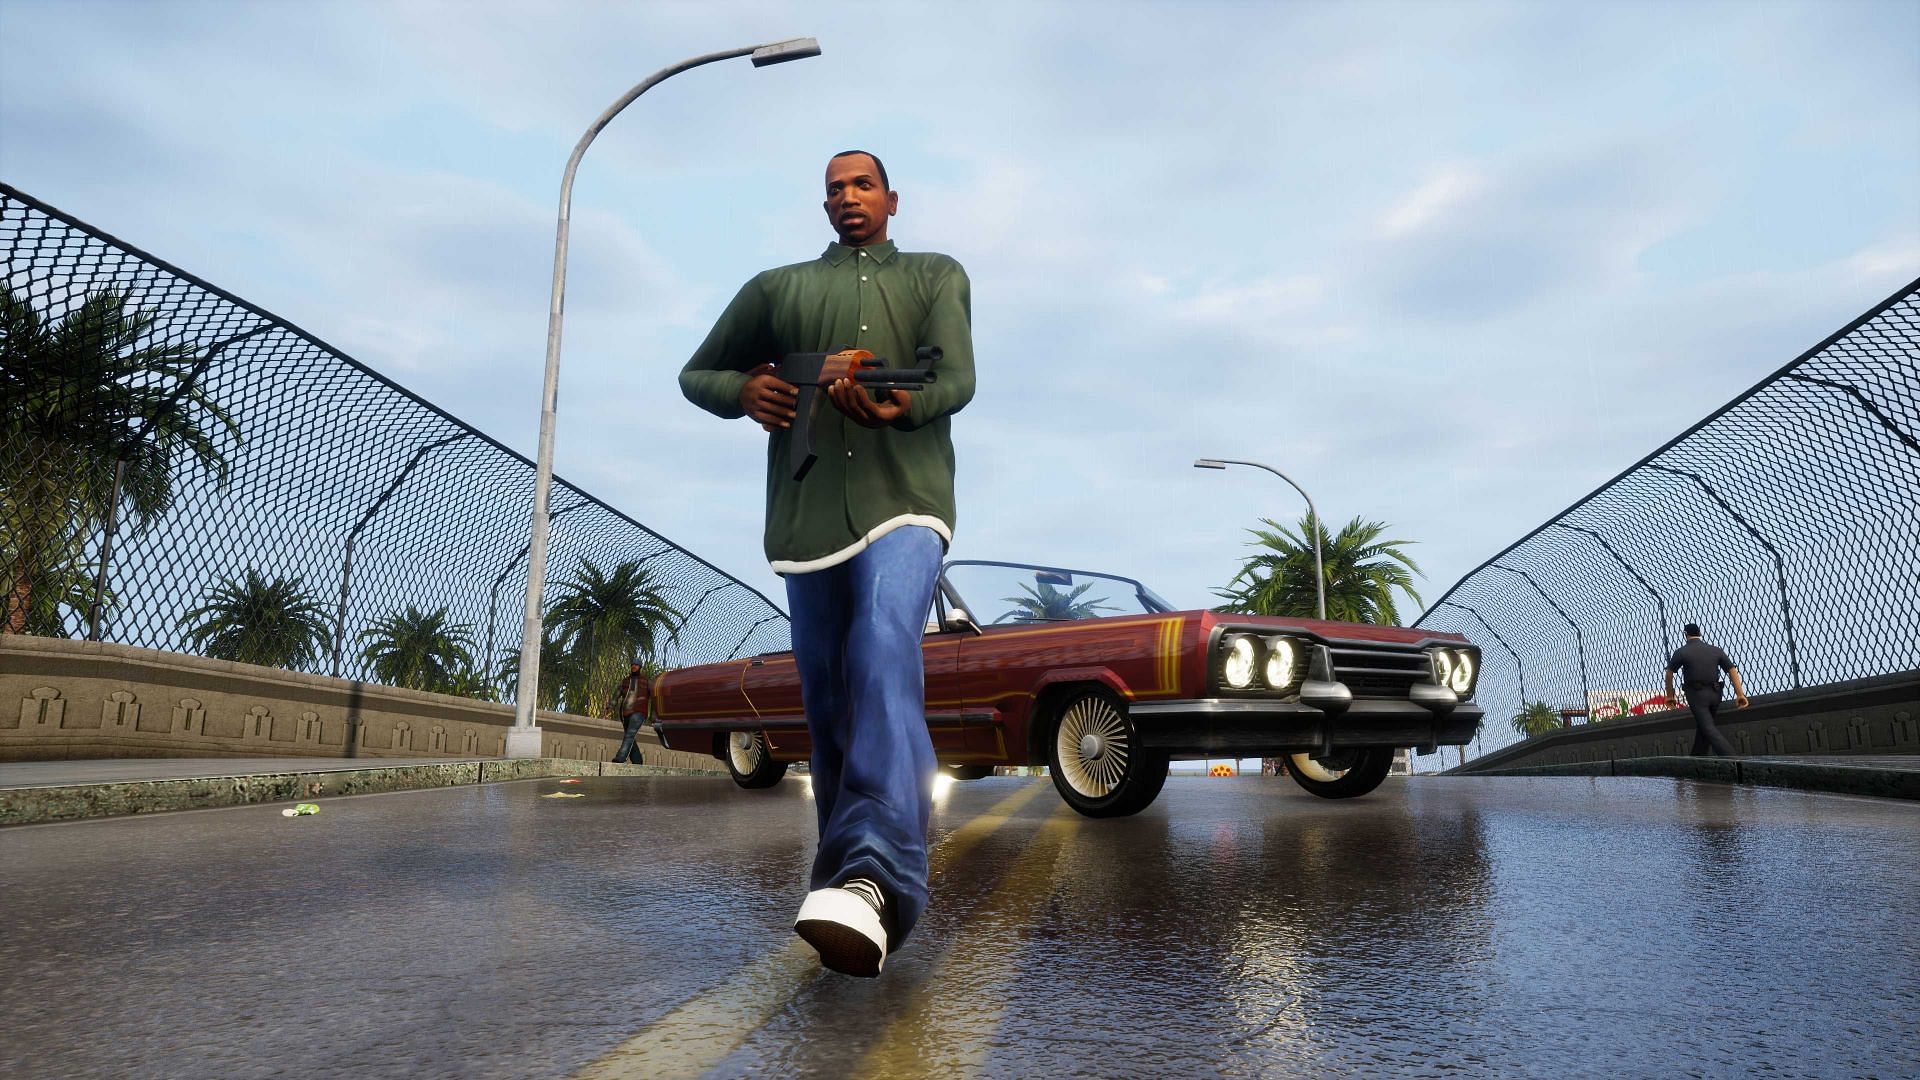 Grand Theft Auto: San Andreas - The Definitive Edition New HD Texture Pack  Overhauls World Textures